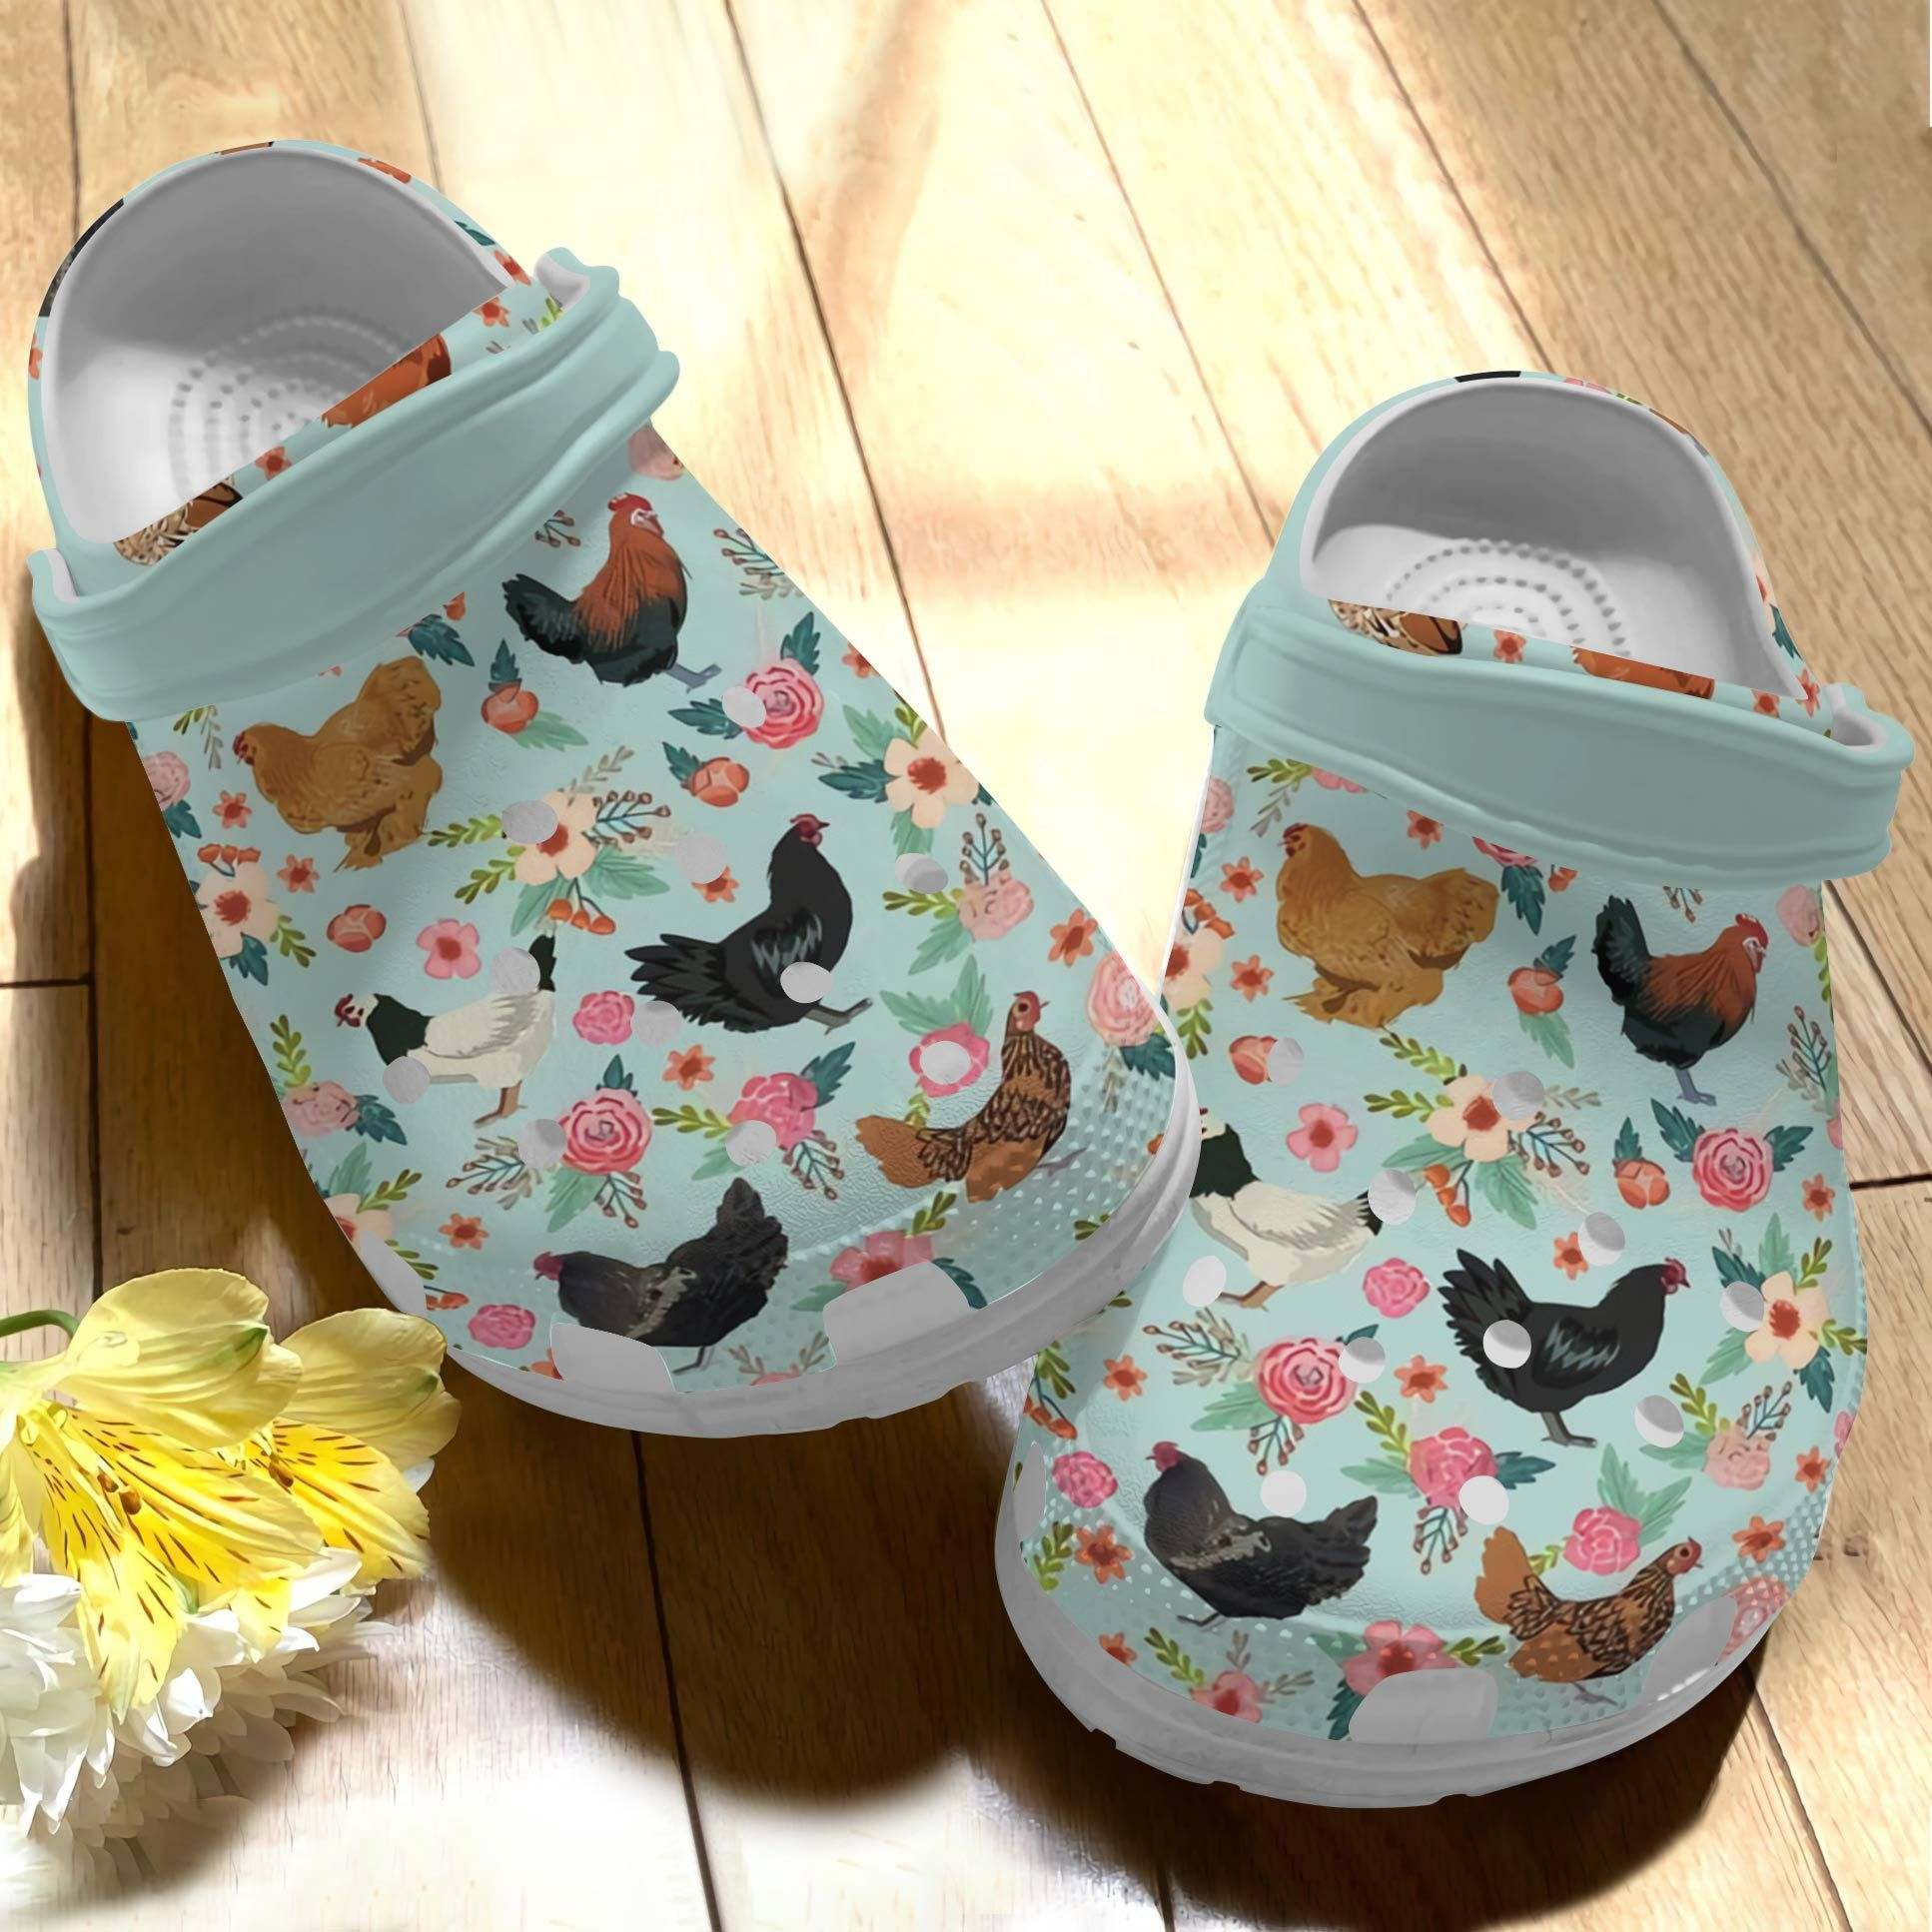 I Love Chickens Croc Crocs Shoes For Girl Birthday - Chickens Flowers Crocs Shoes Crocbland Clog